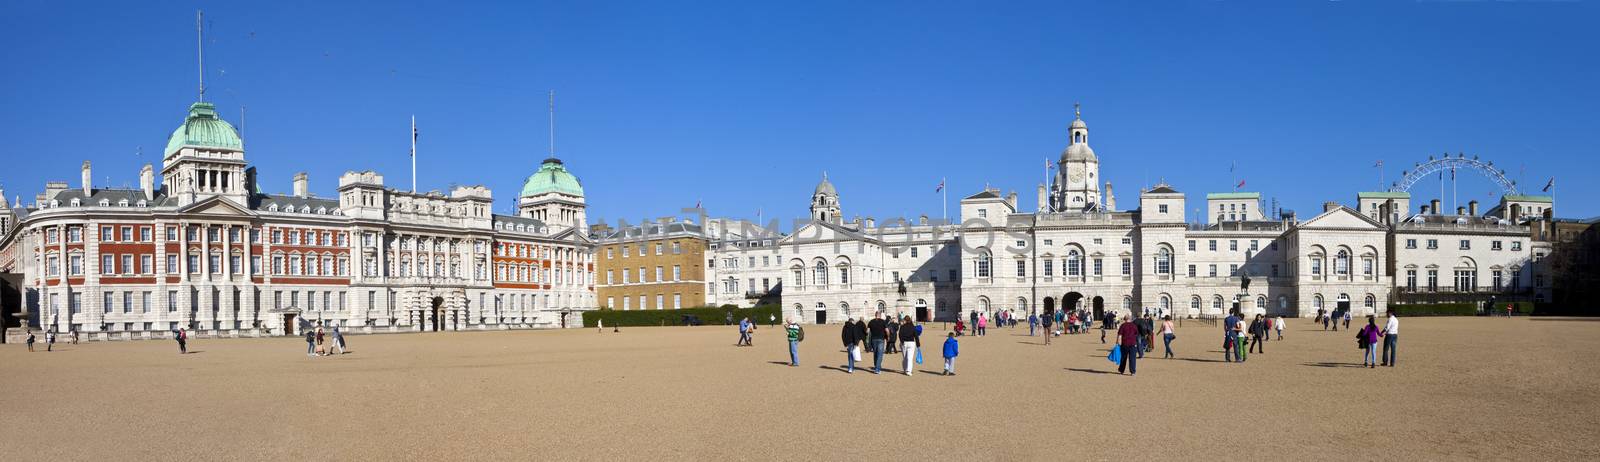 Horseguards Parade in London by chrisdorney